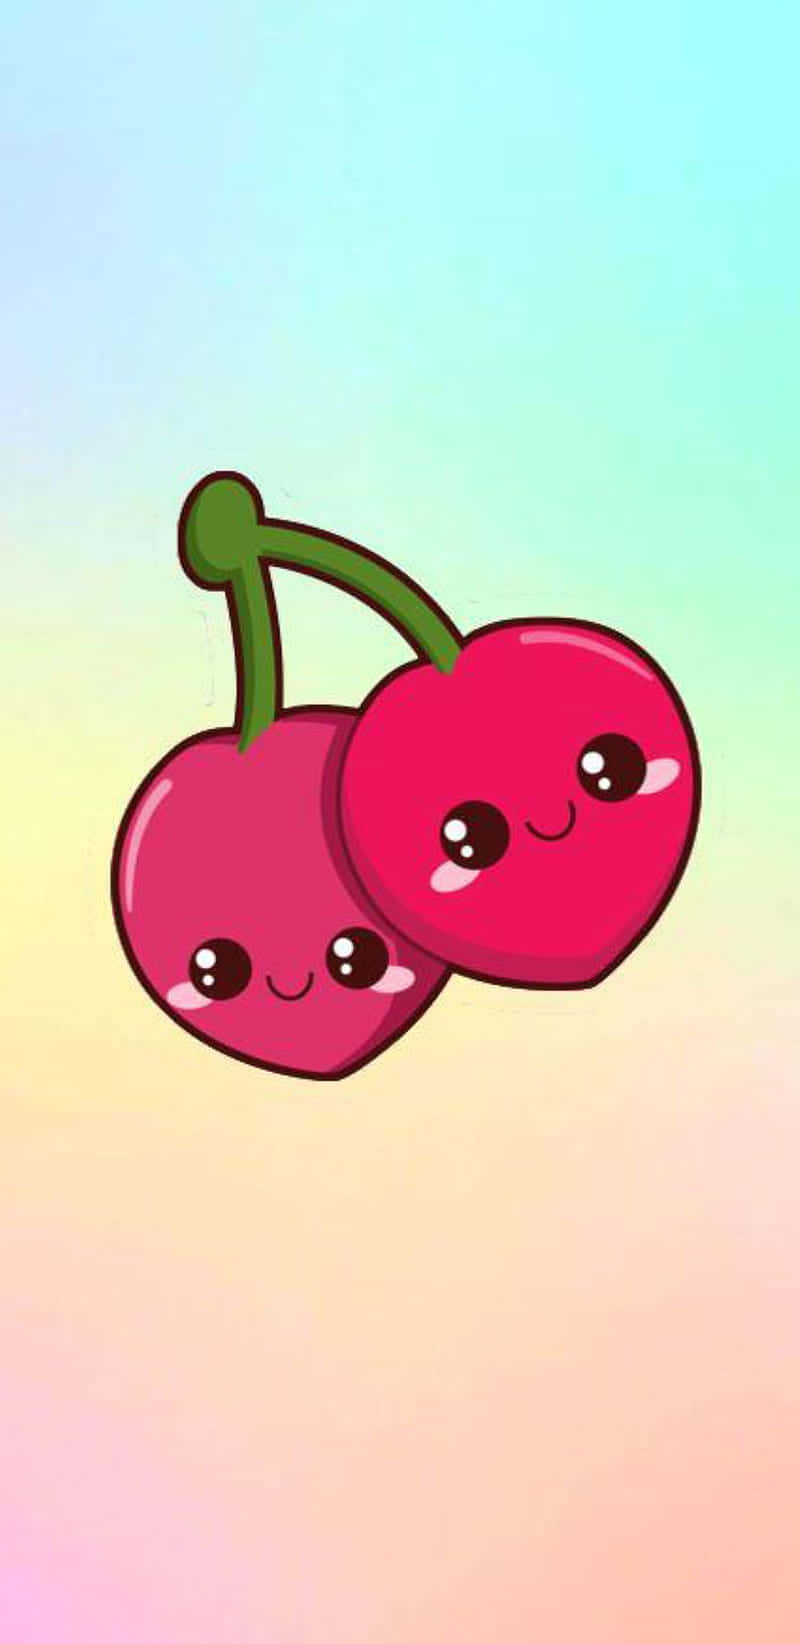 Cute Cherry With Adorable Blushing Face Wallpaper